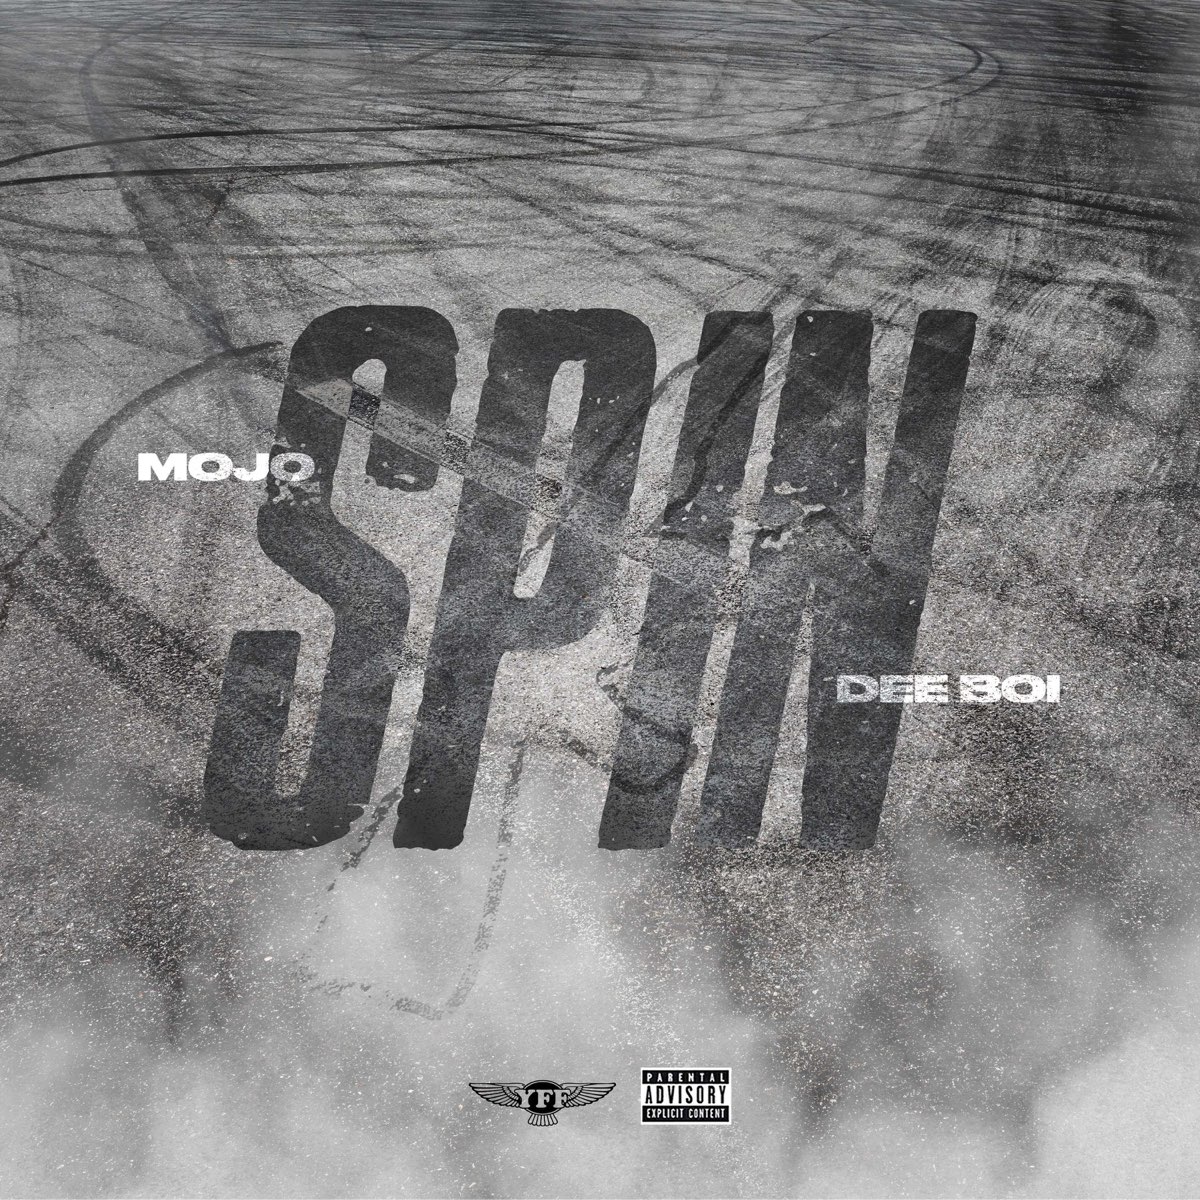 Spin feat. Vee Tha Rula.